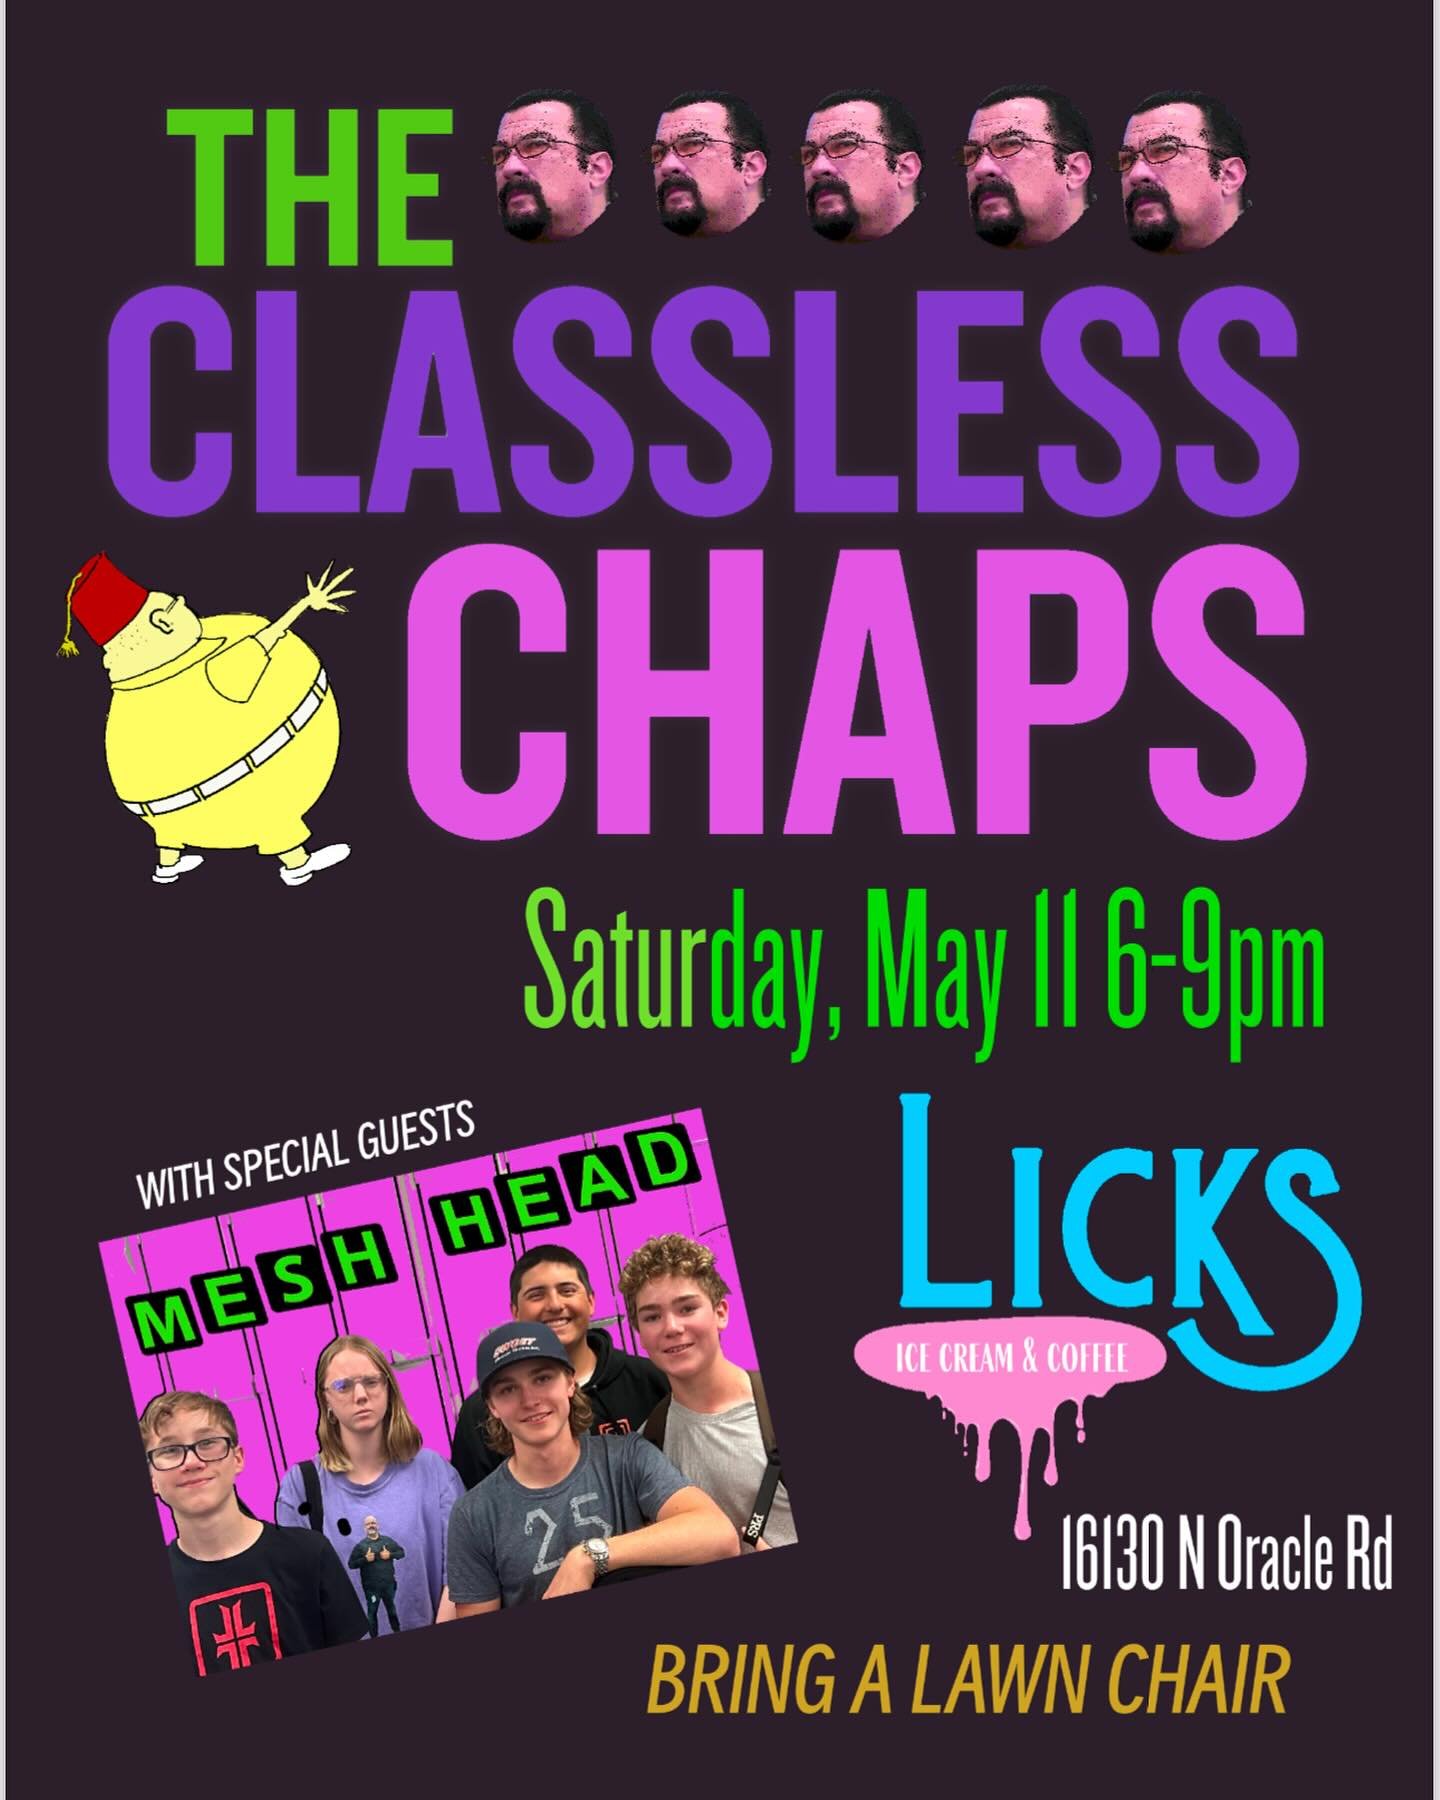 Music on Licks Patio continues May 11th! With our Cat-town homies @theclasslesschaps_official  6-9pm 🪑 bring a lawn chair and your hunnie 💗 #lickspatio #tucsonmusic #classlesschaps #tucson #tucsonicecream #tucsondessert #orovalley #orovalleyevents 